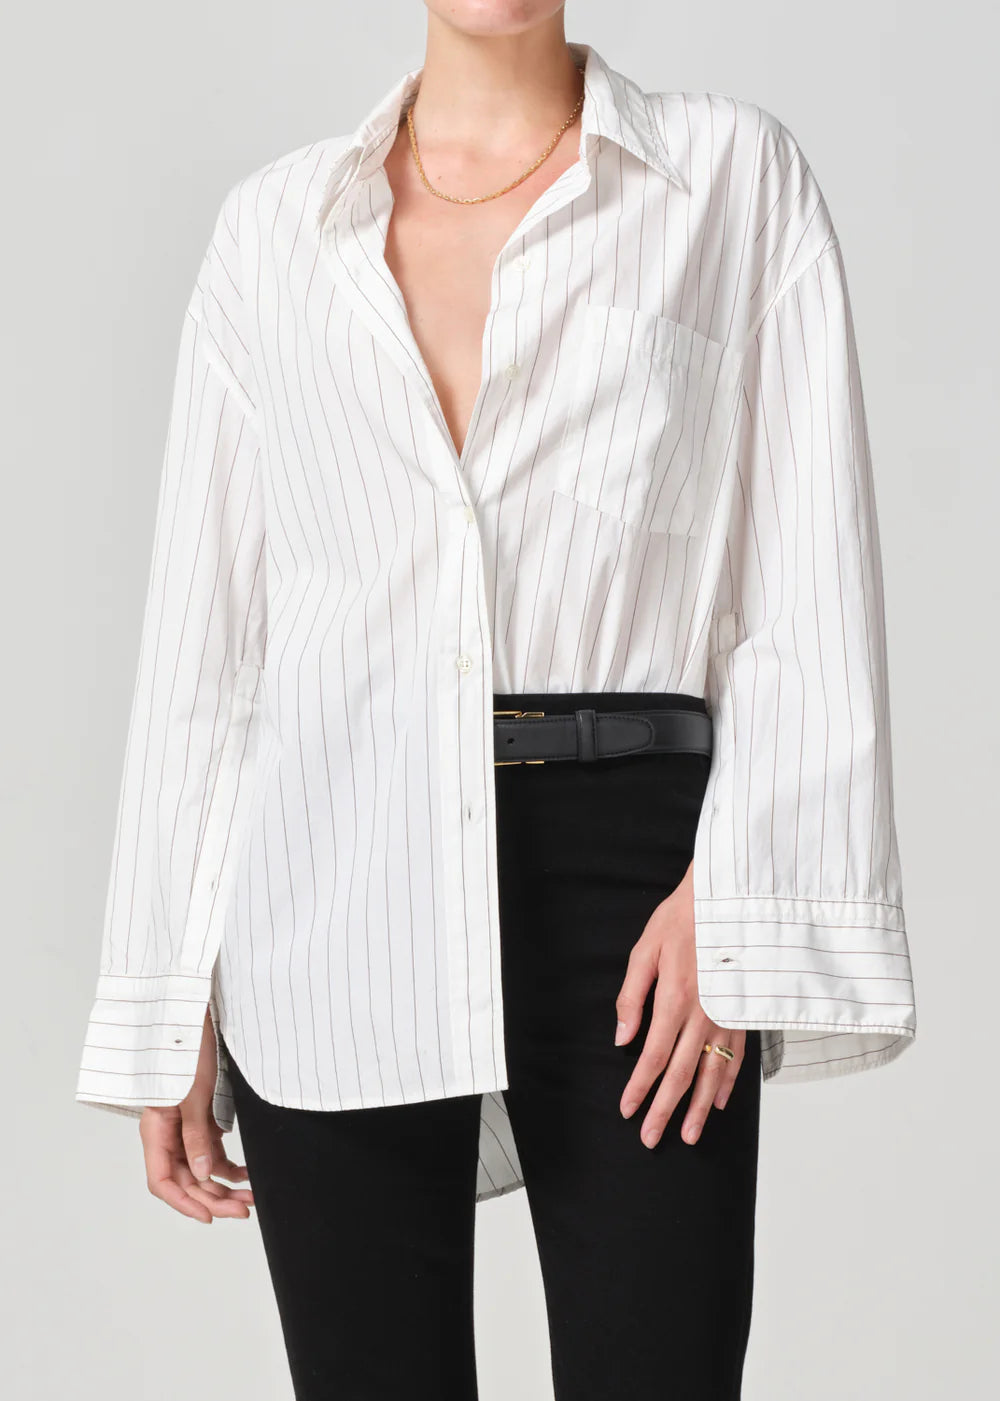 Citizens of Humanity Cocoon Shirt, oversized shirt, button down shirt, striped shirt, long sleeved top, women's clothing